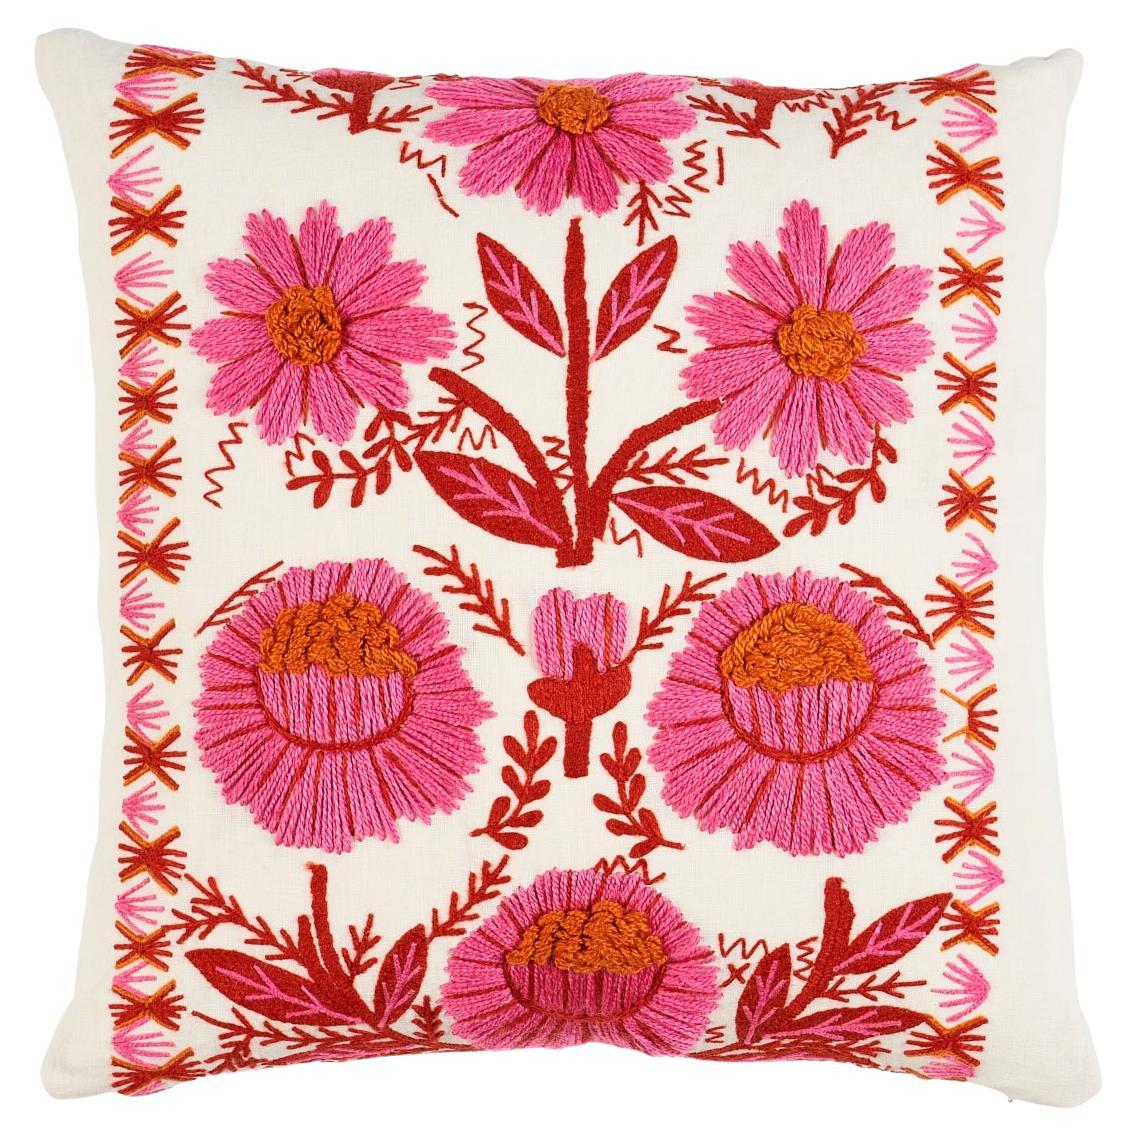 Shumacher Marguerite Embroidery 20" Pillow in Blossom For Sale